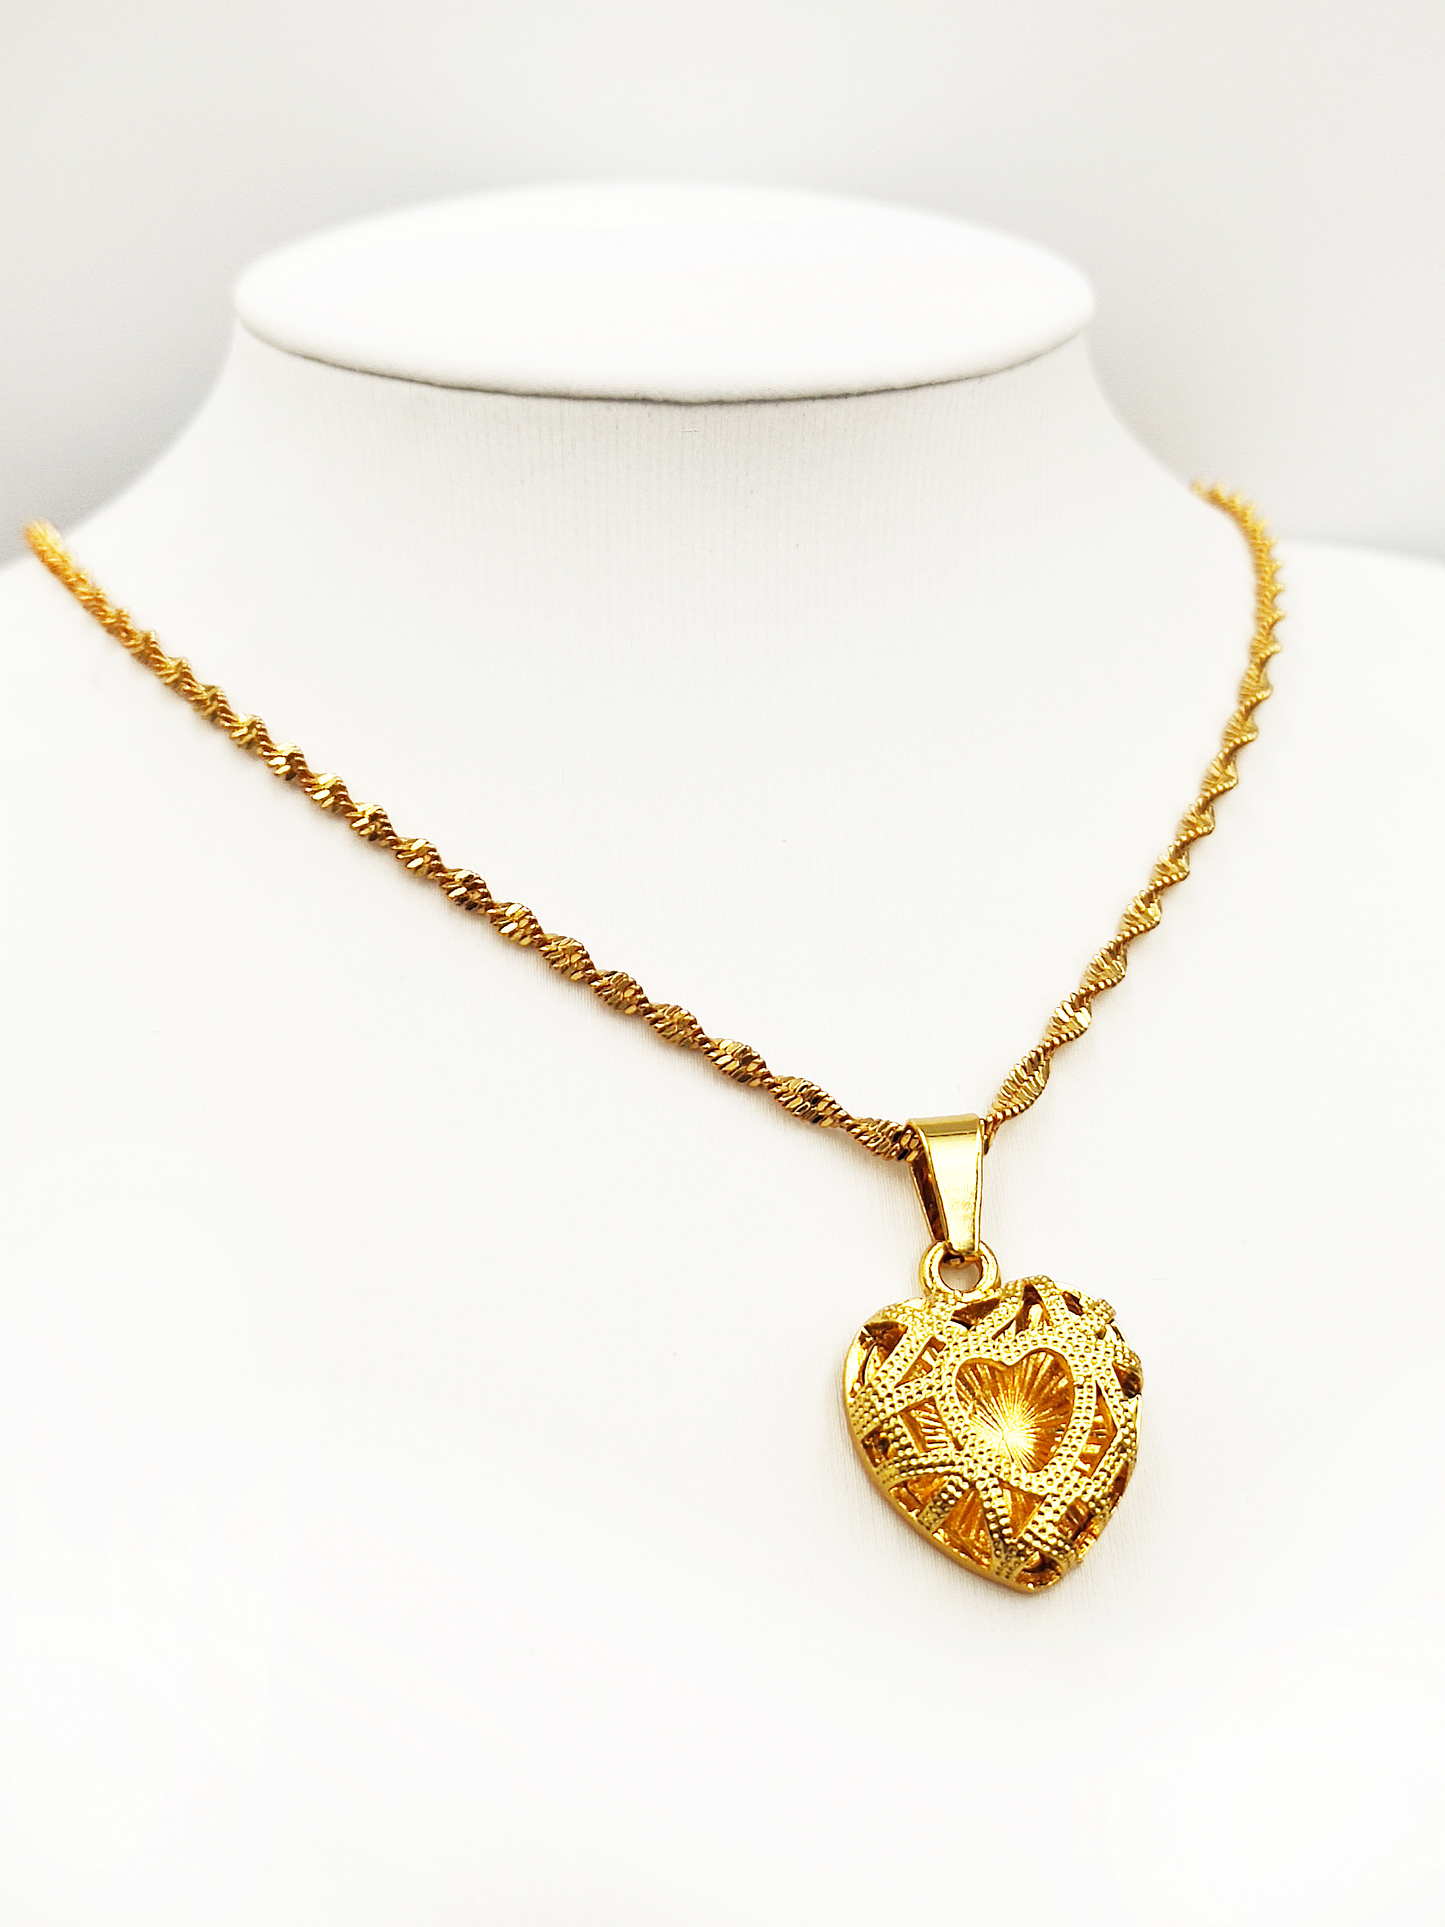 Titanium/Gold Plated Heart Pendent & Chain set ($66 take away)